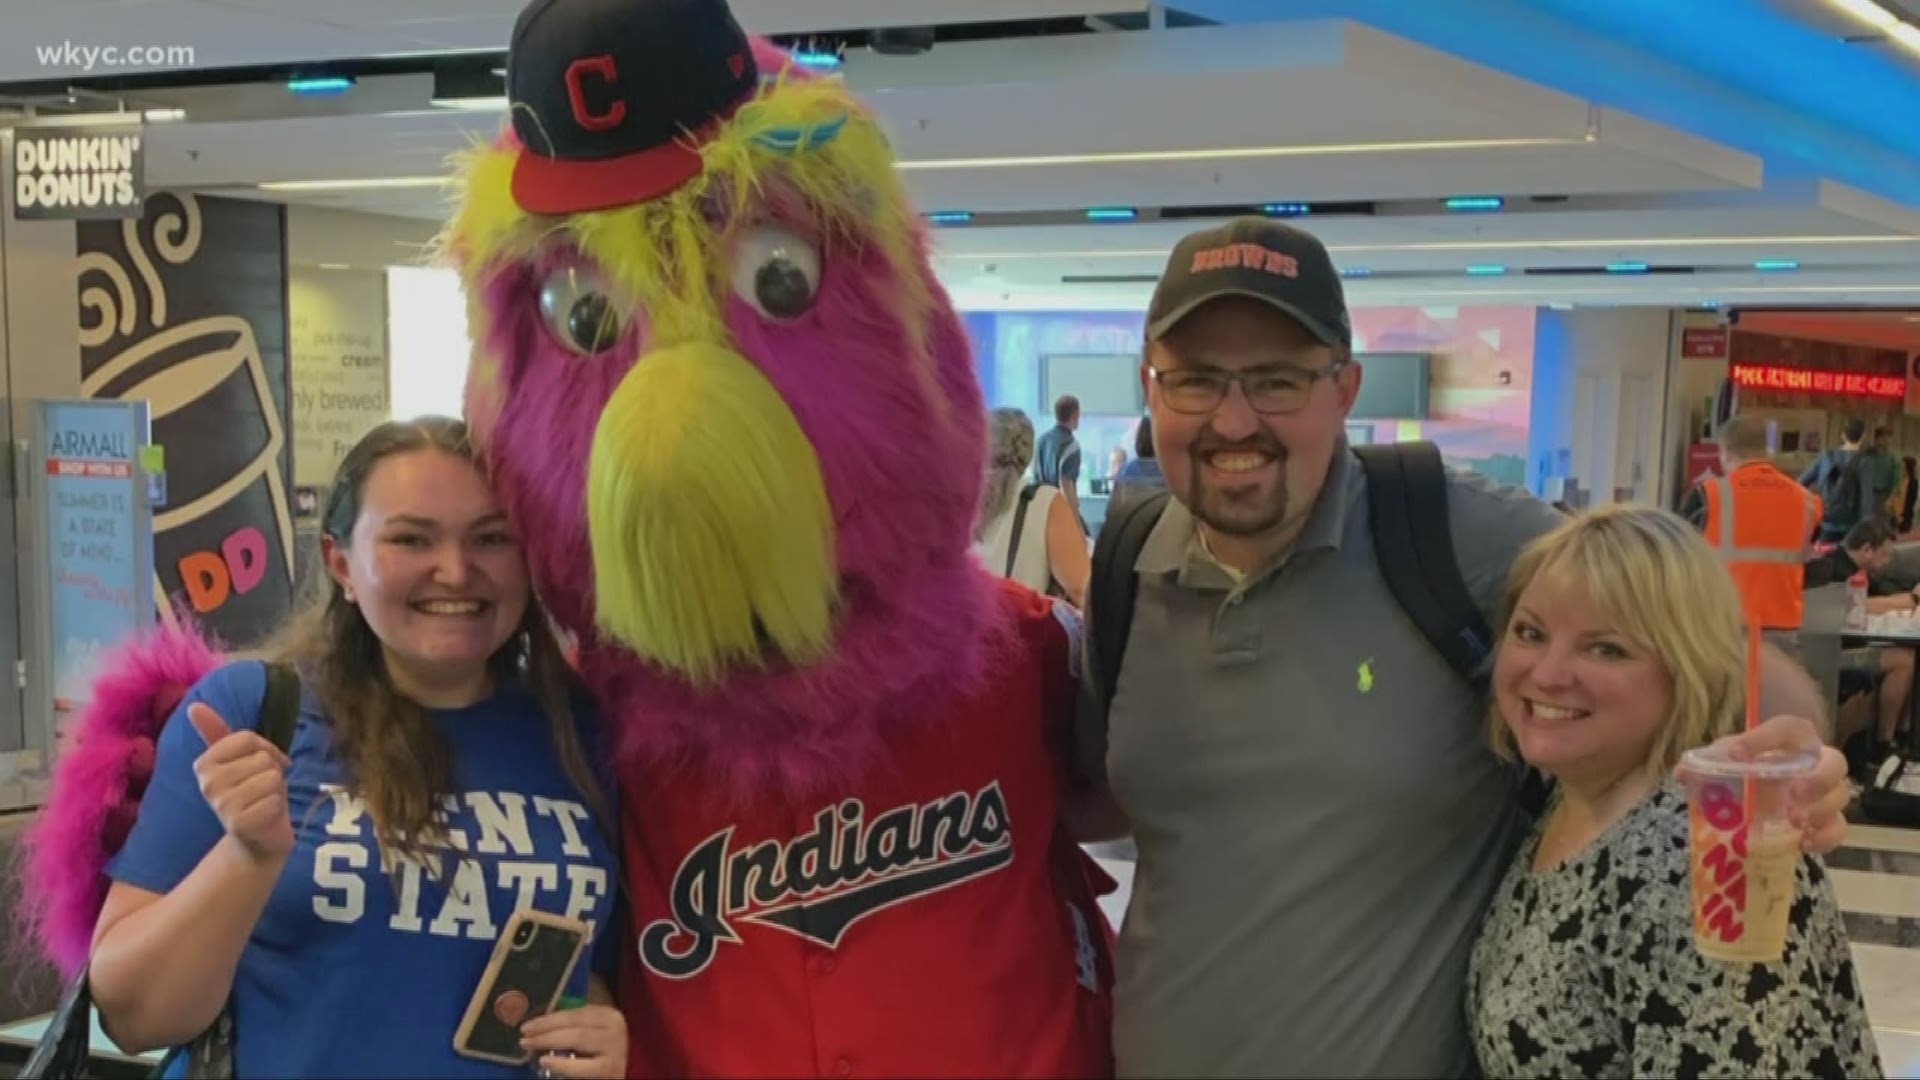 Sept. 27, 2019: Cleveland Indians fans are pumped up for this weekend as the Tribe fights for a Wild Card spot. Here are some viewer-submitted photos from the park.